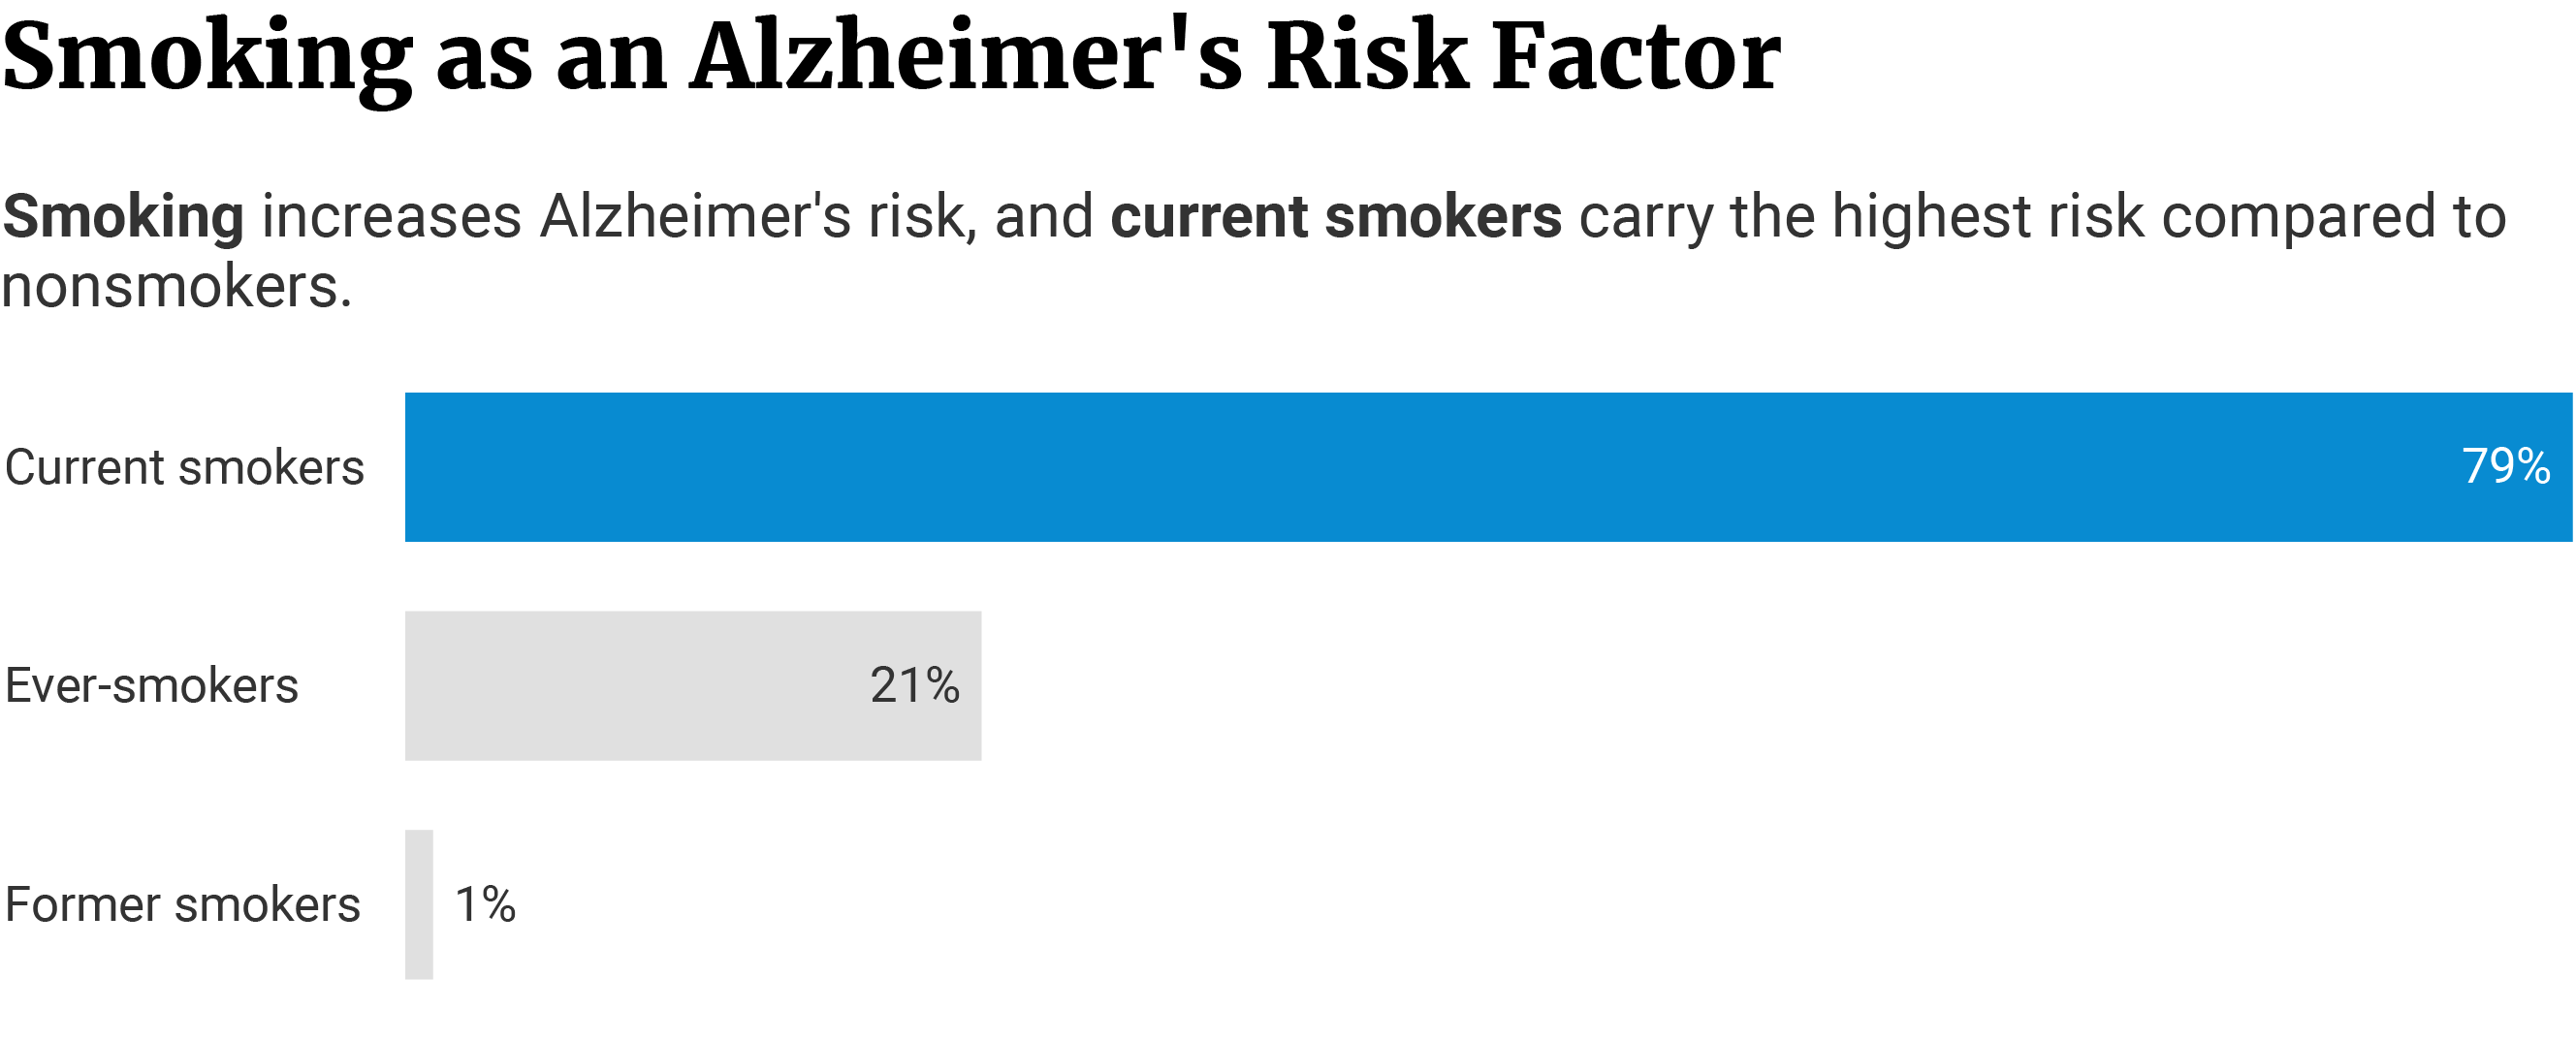 Horizontal bars showing current smokers have the highest Alzheimer's risk at 79% compared to ever-smokers at 21% and former smokers at 1%.